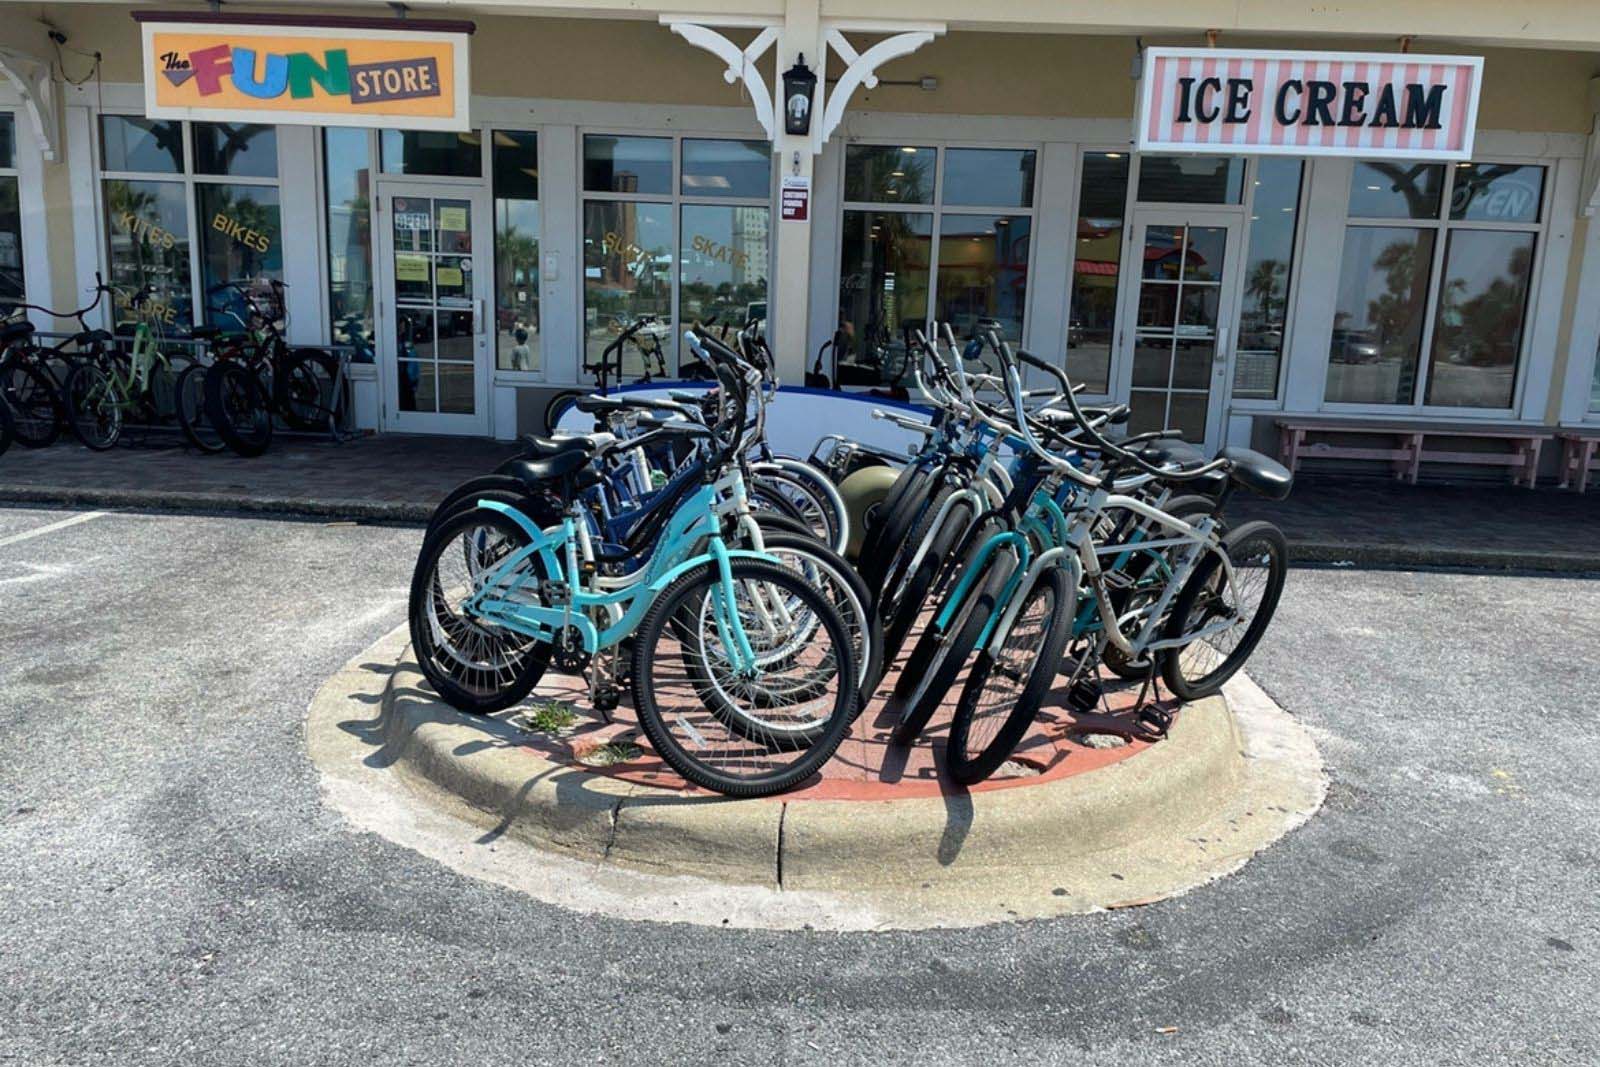 Rent bikes, kayaks, golf carts and more from The Fun Store in Pensacola Beach